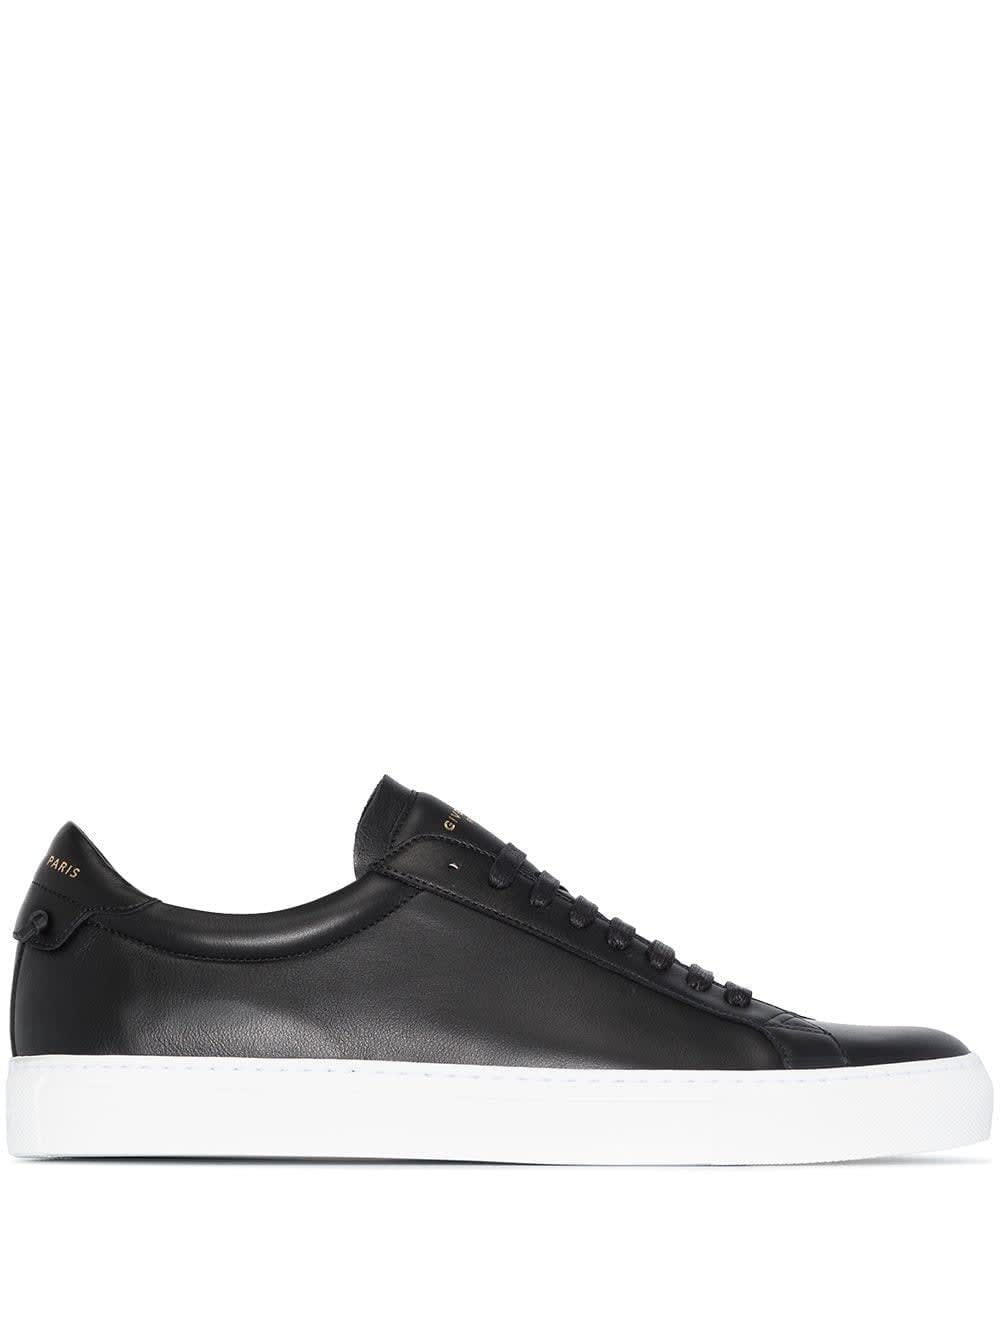 Givenchy Man Black And White Urban Street Sneakers